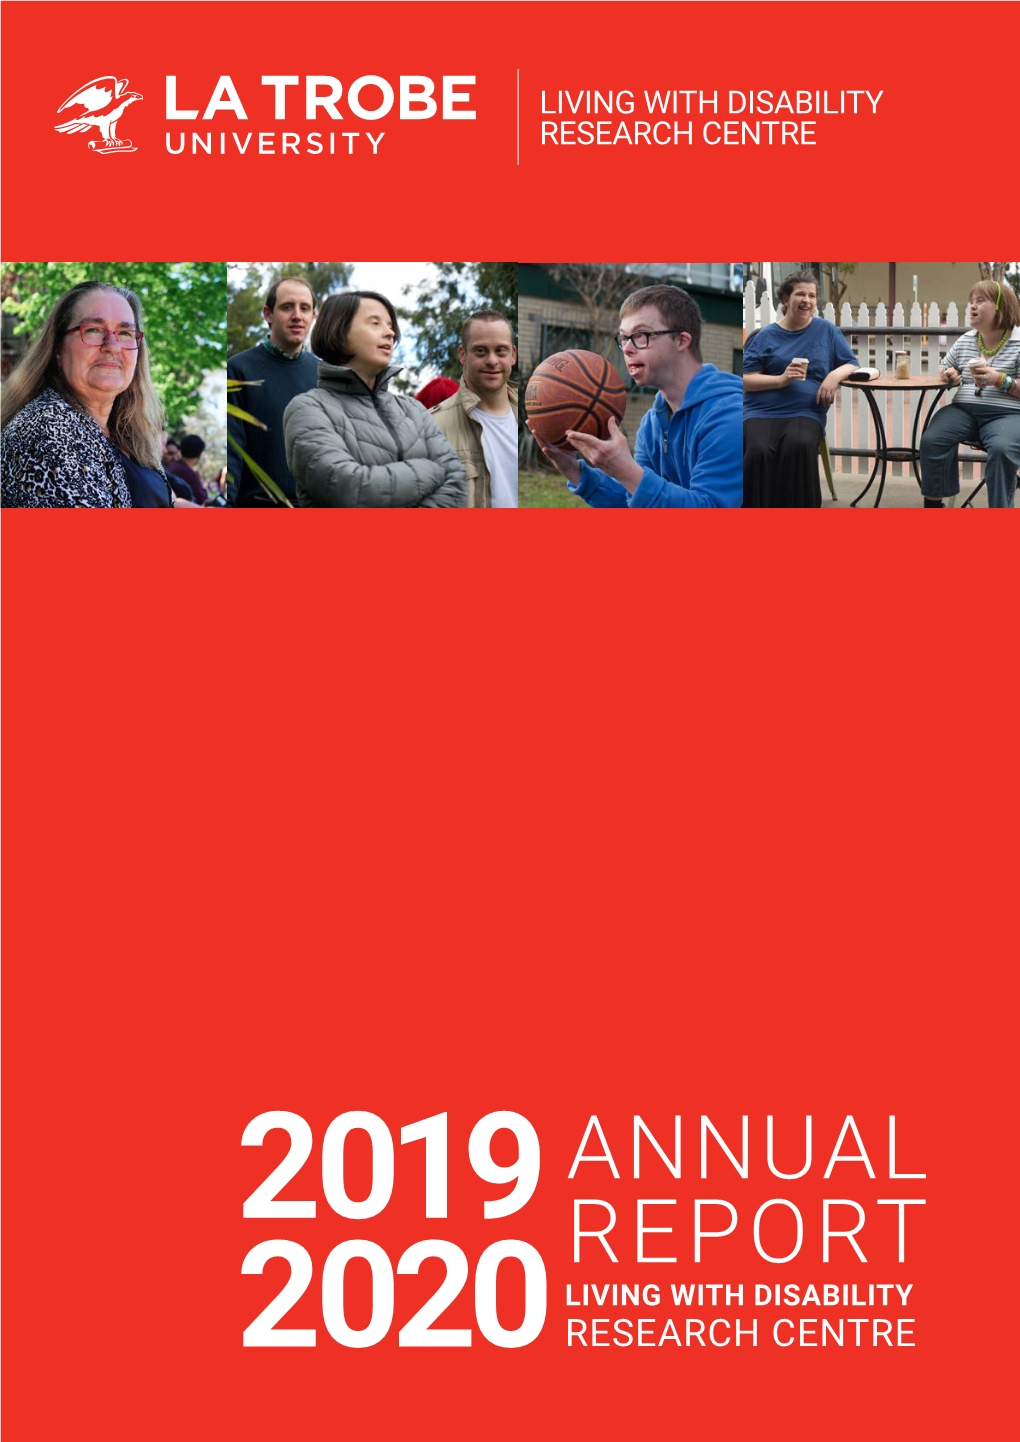 2020 RESEARCH CENTRE LIVING with DISABILITY RESEARCH CENTRE ANNUAL REPORT 20219-2020 1 2 LA TROBE UNIVERSITY Contents